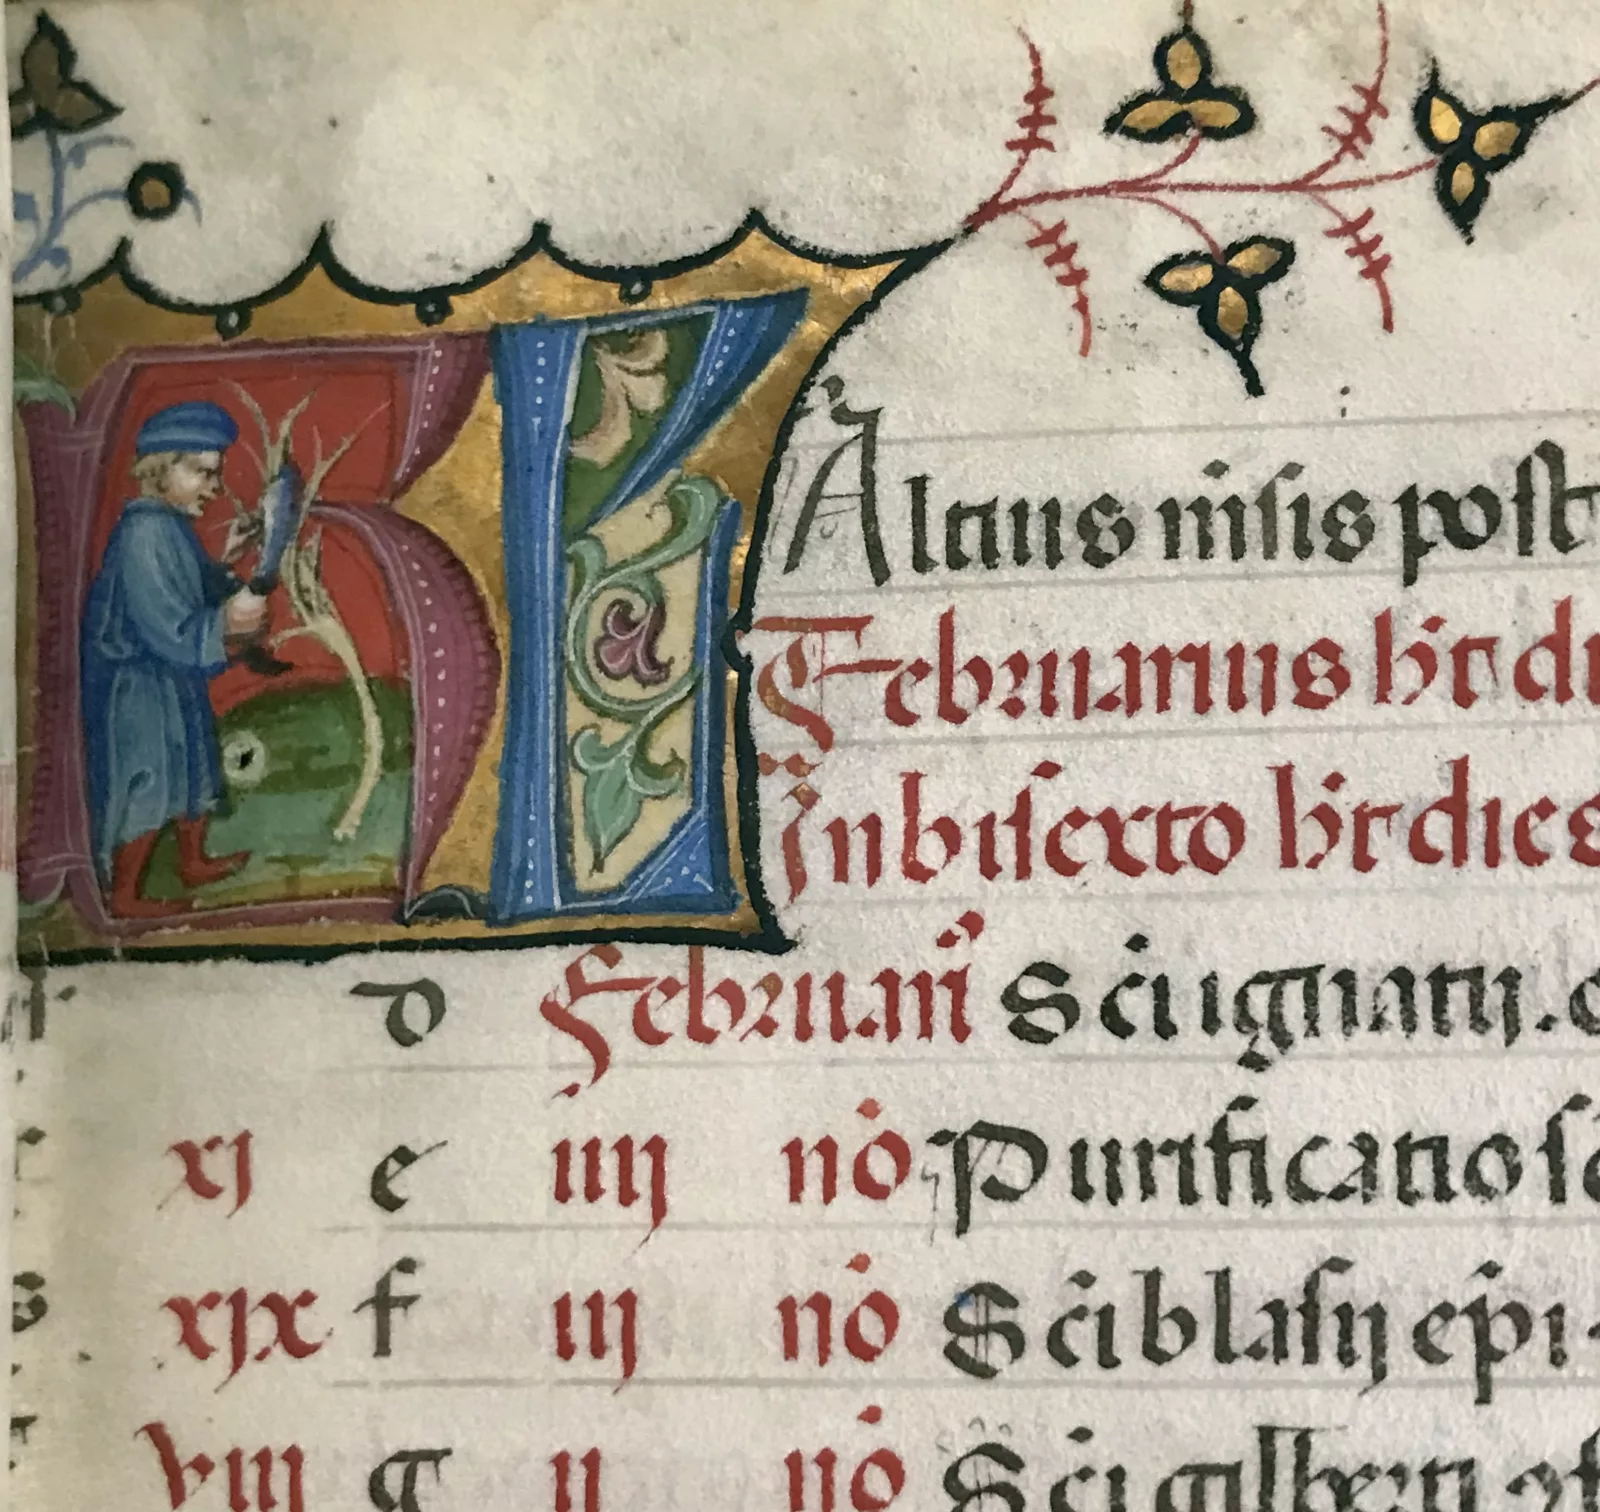 An illuminated initial depicts the act of pruning trees that was associated with the month of February.